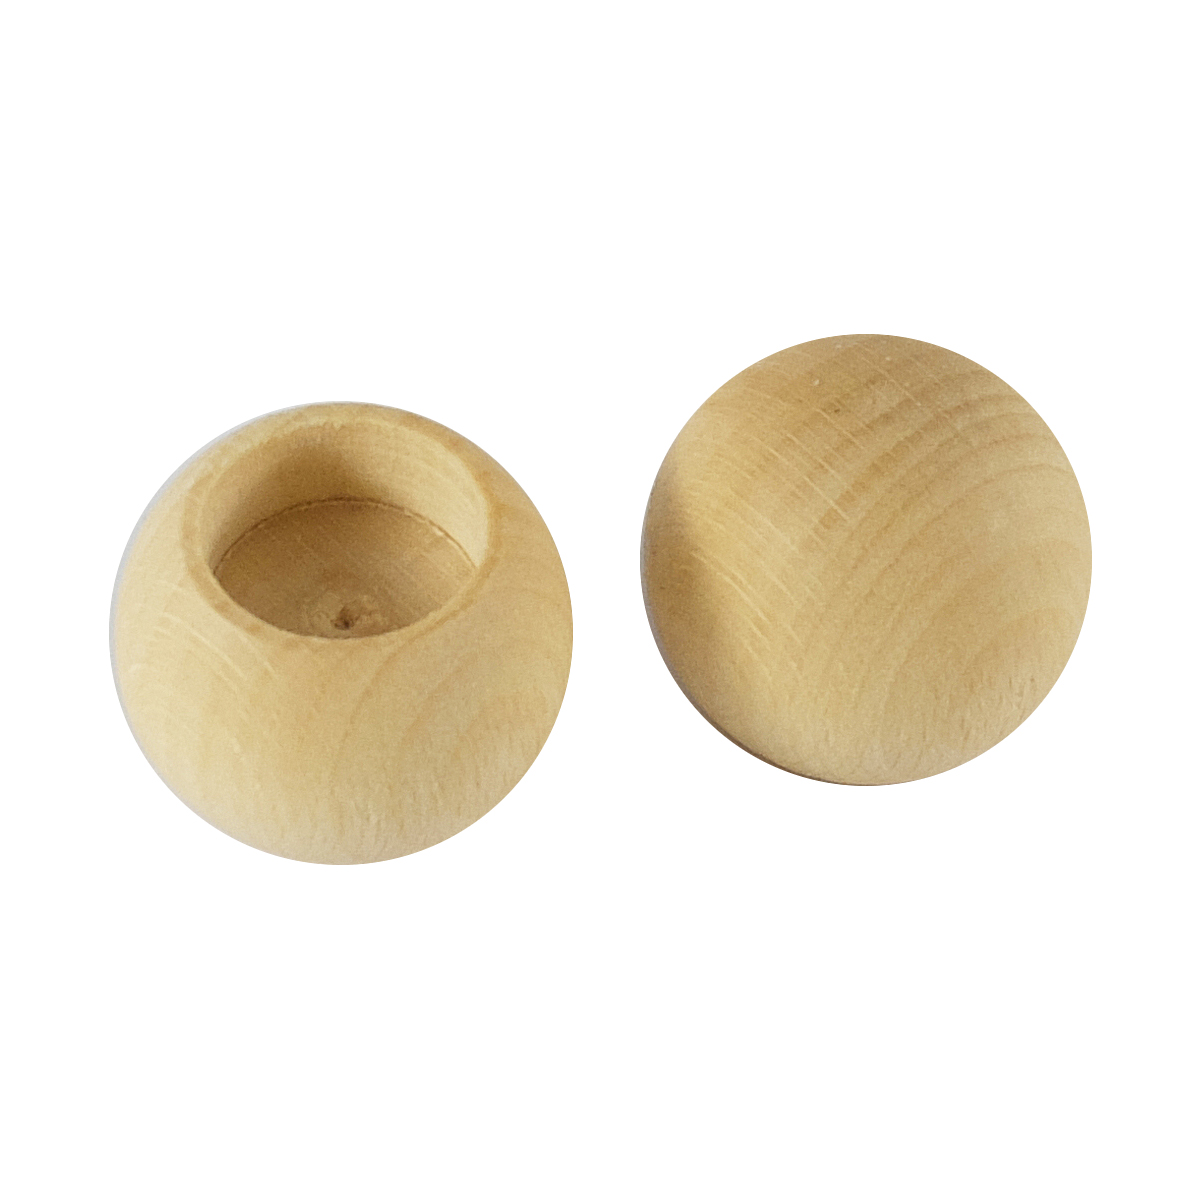 Wooden bottle stoppers